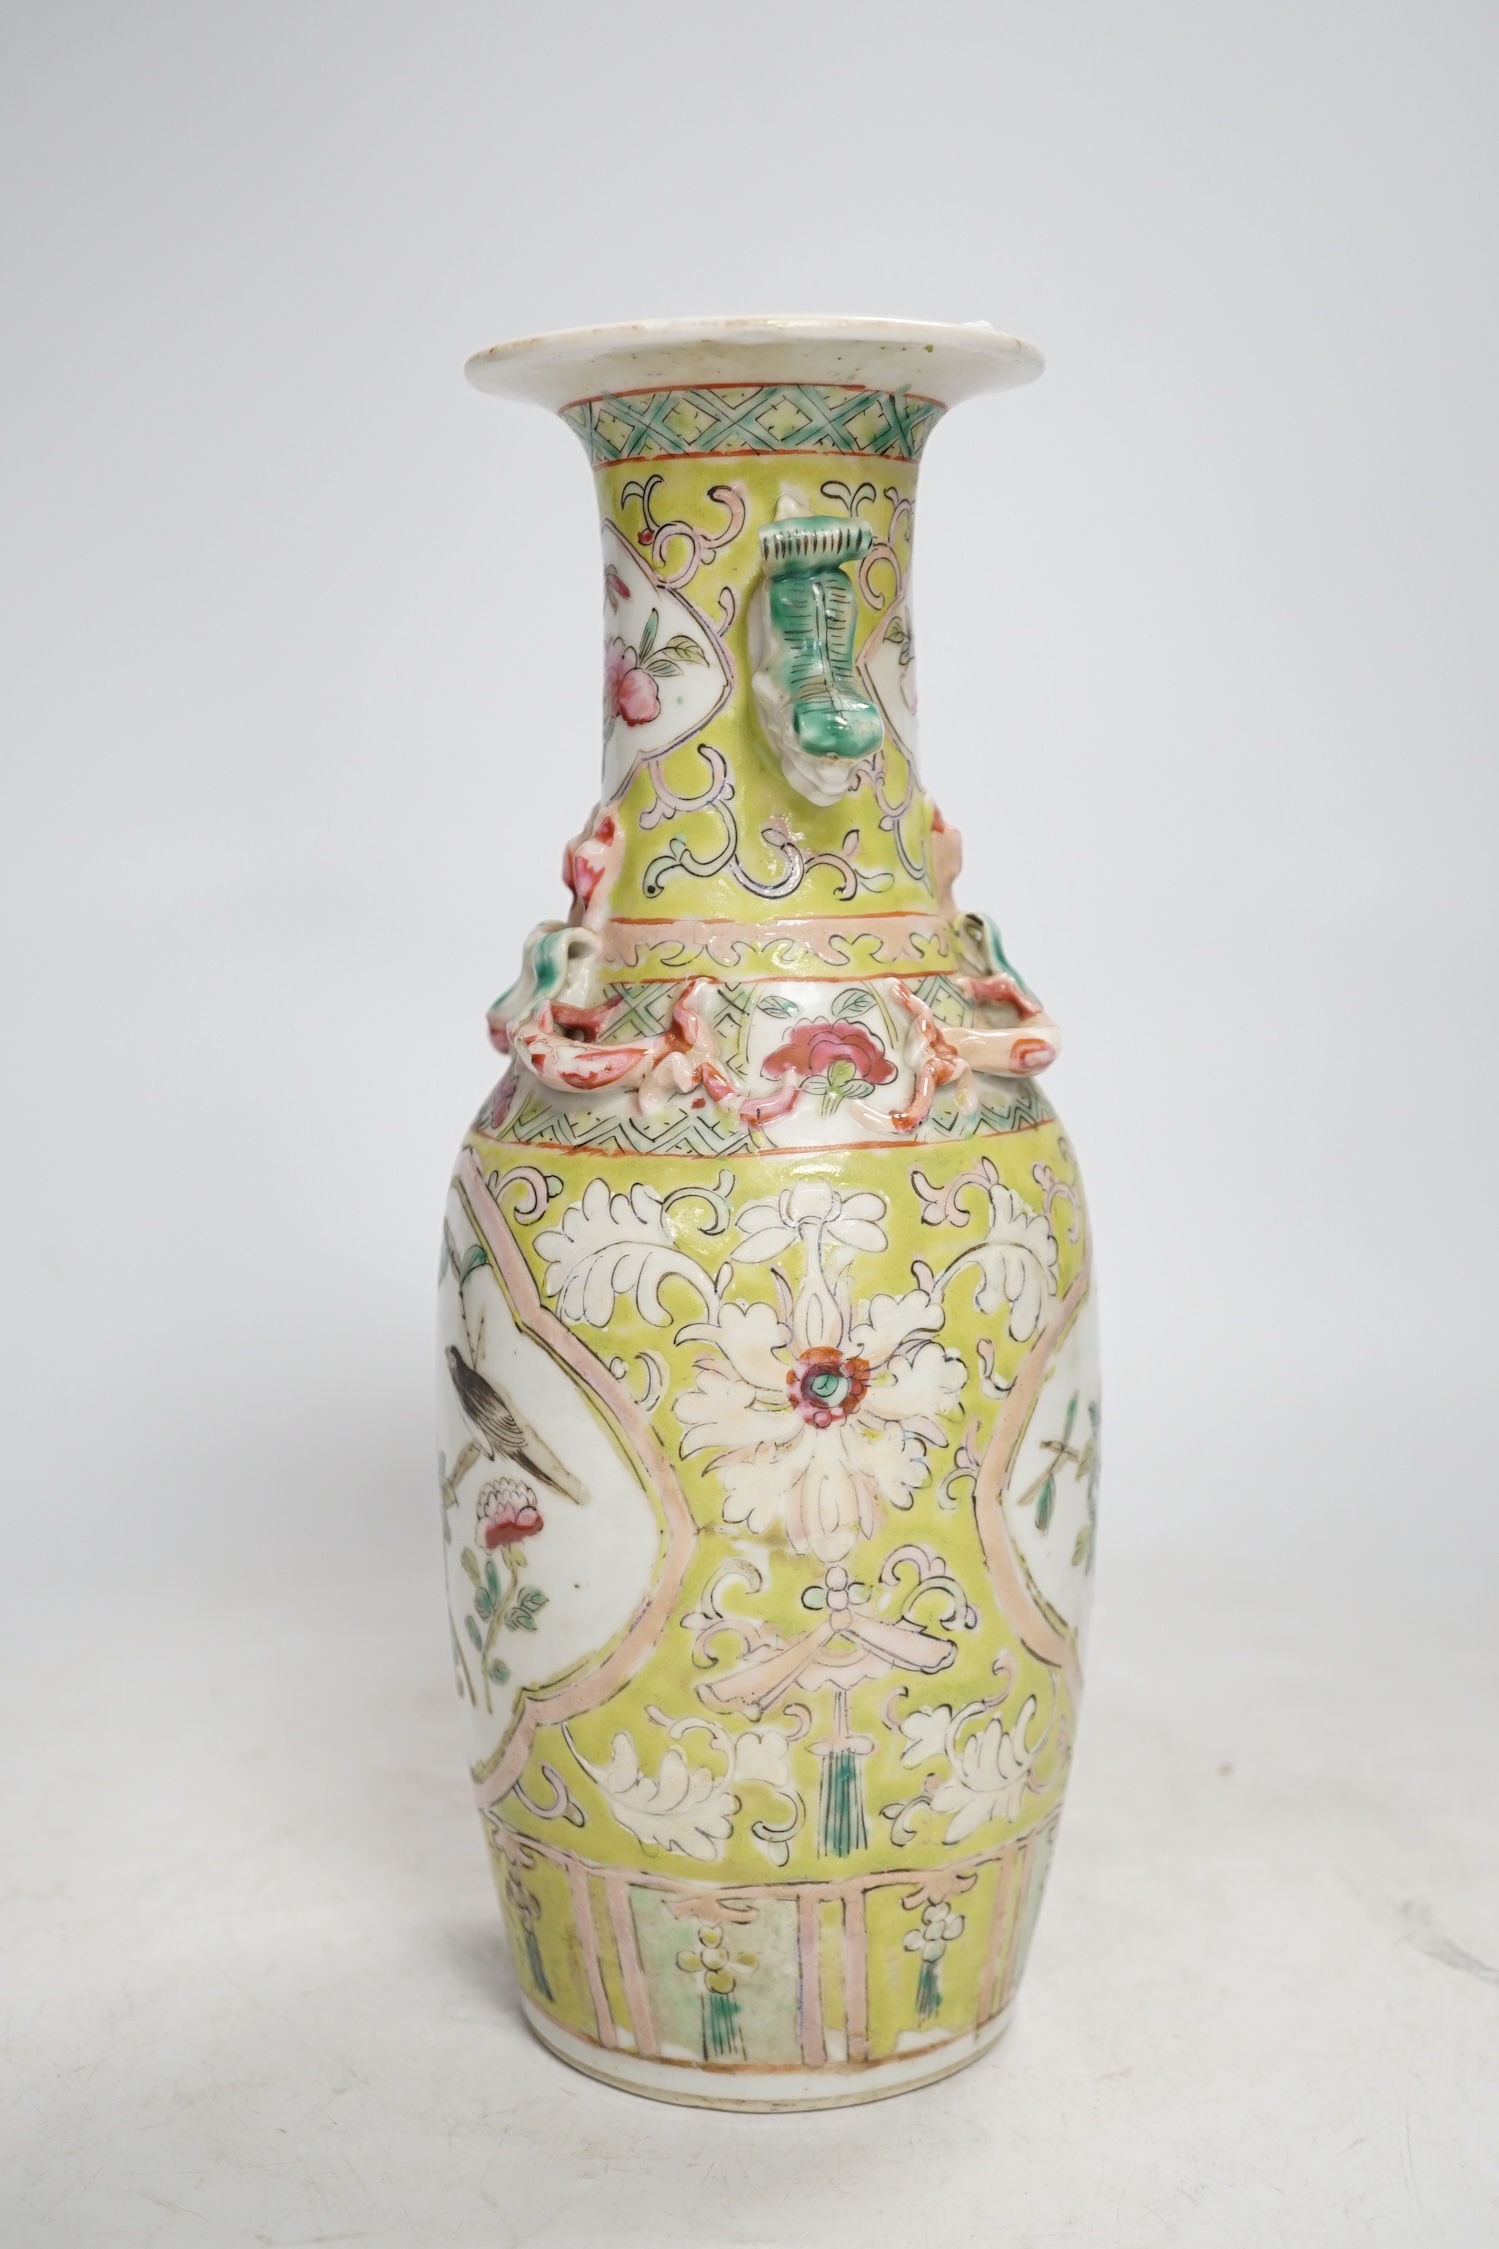 A 19th century Chinese vase, for the Malaysian Straits market, 25cm high. Condition - some minor chips to neck lip, fair